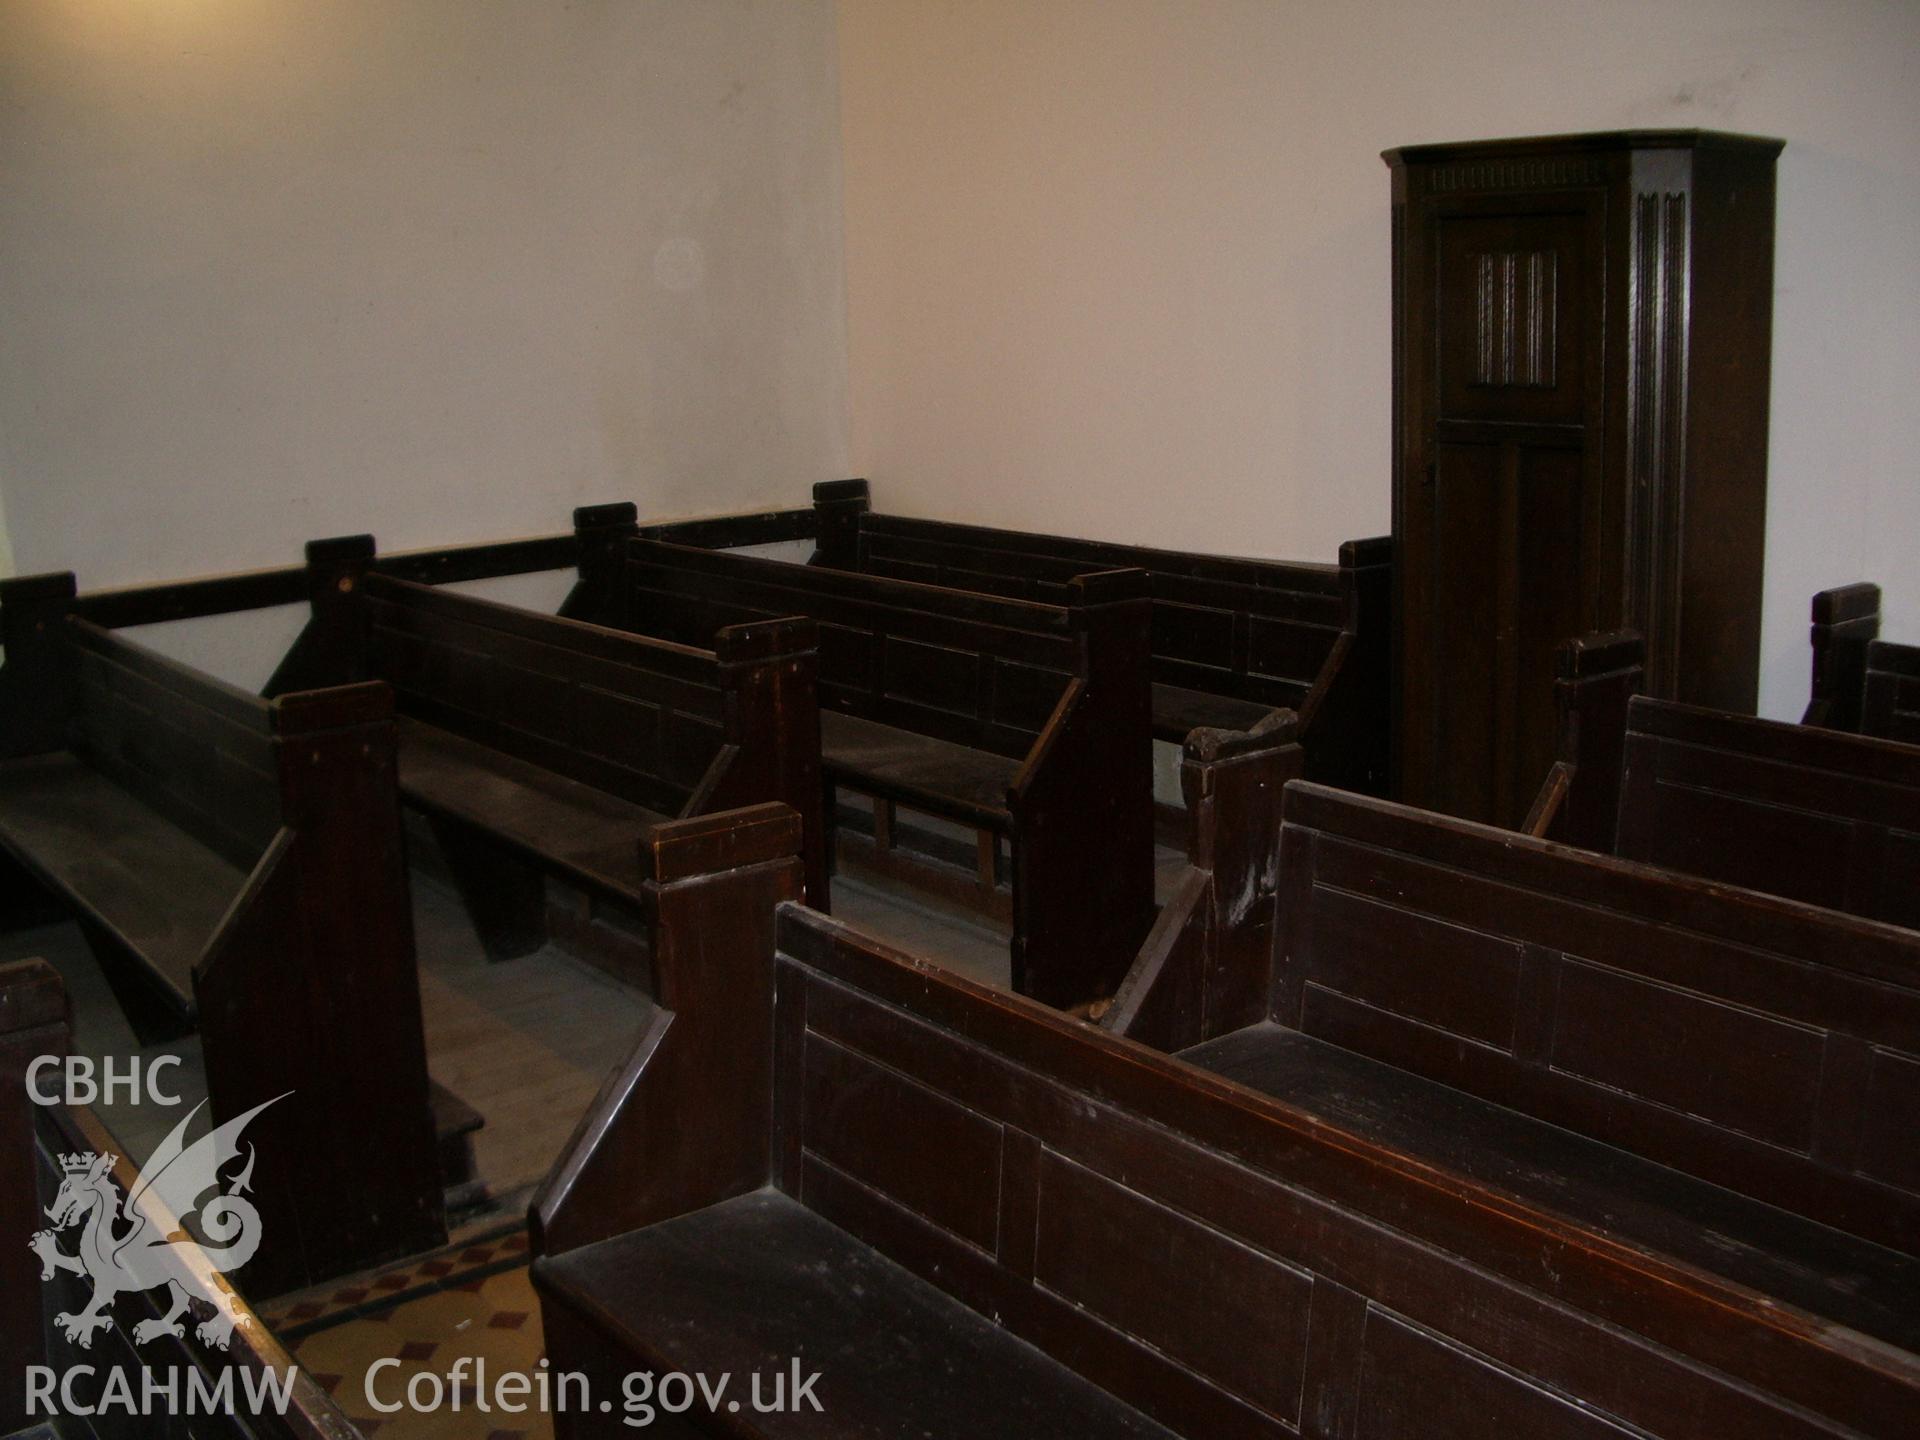 Interior view of the church showing the pews.